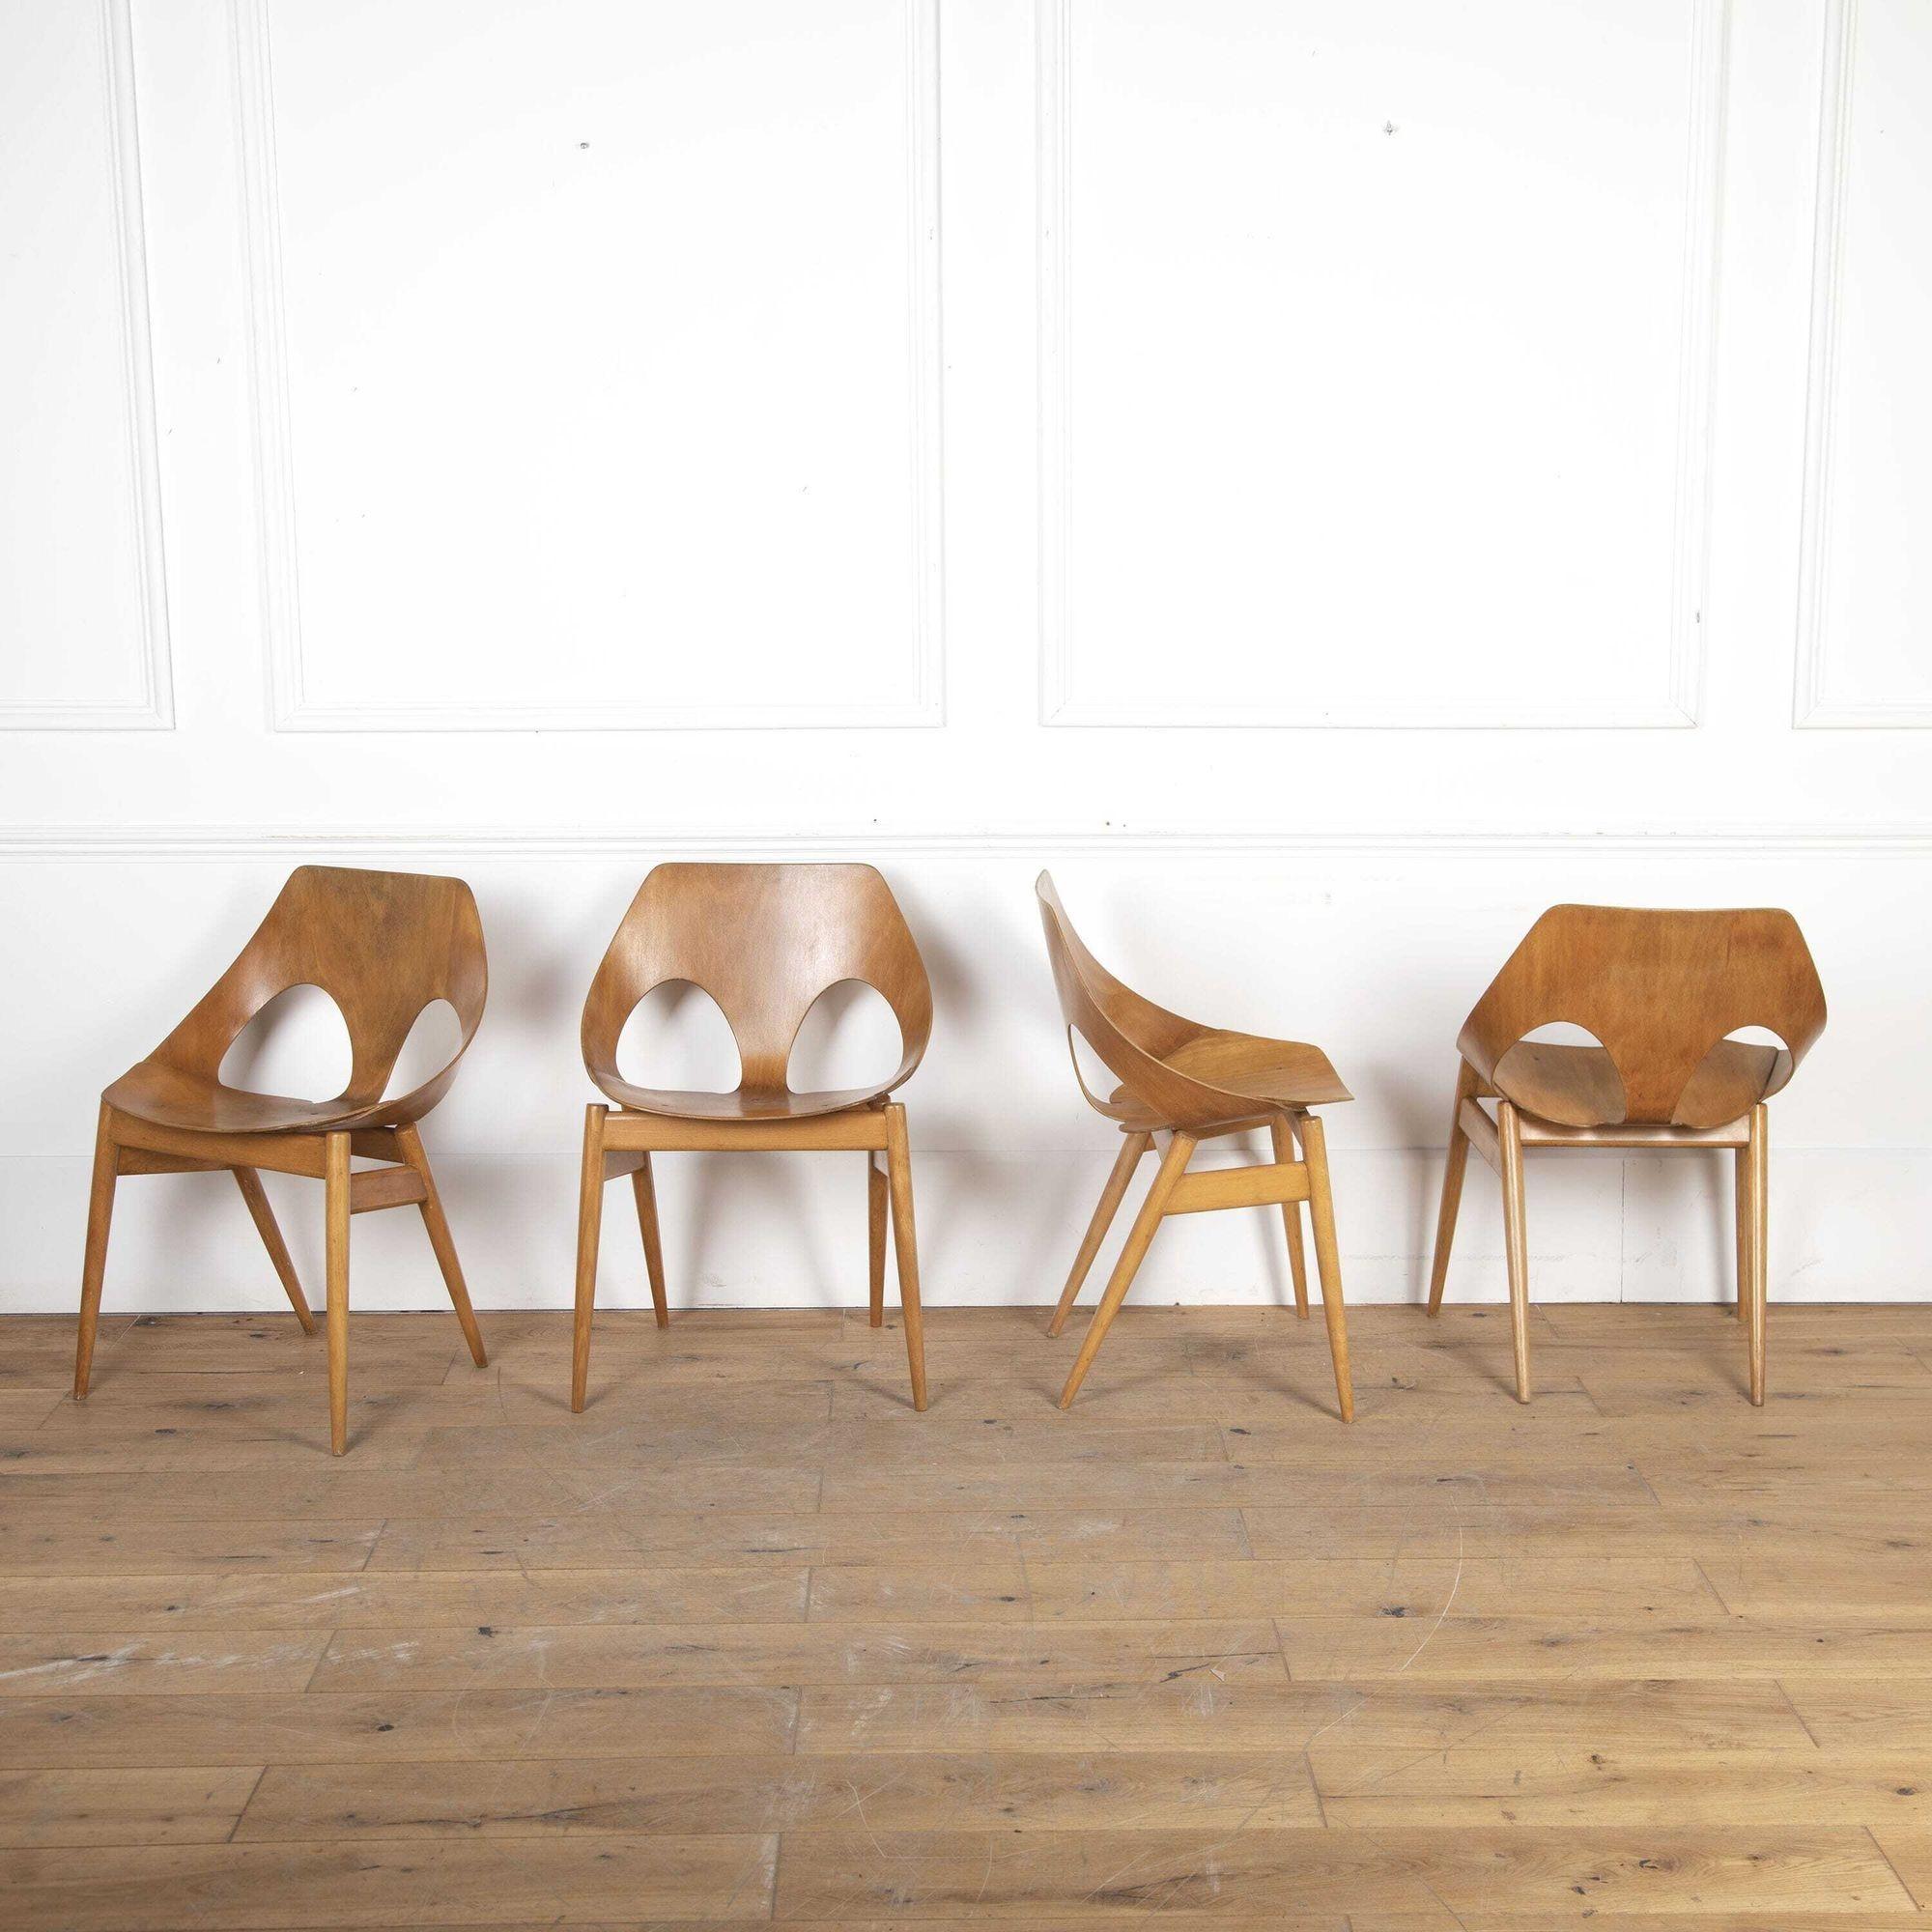 Set of four iconic design Jason stacking chairs designed by Carl Jacobs.
These chairs have a moulded 5-ply beech plywood seat and a solid beech frame.
An example is held in the permanent collection at the V&A museum.
- - - 
'From the early 1950s